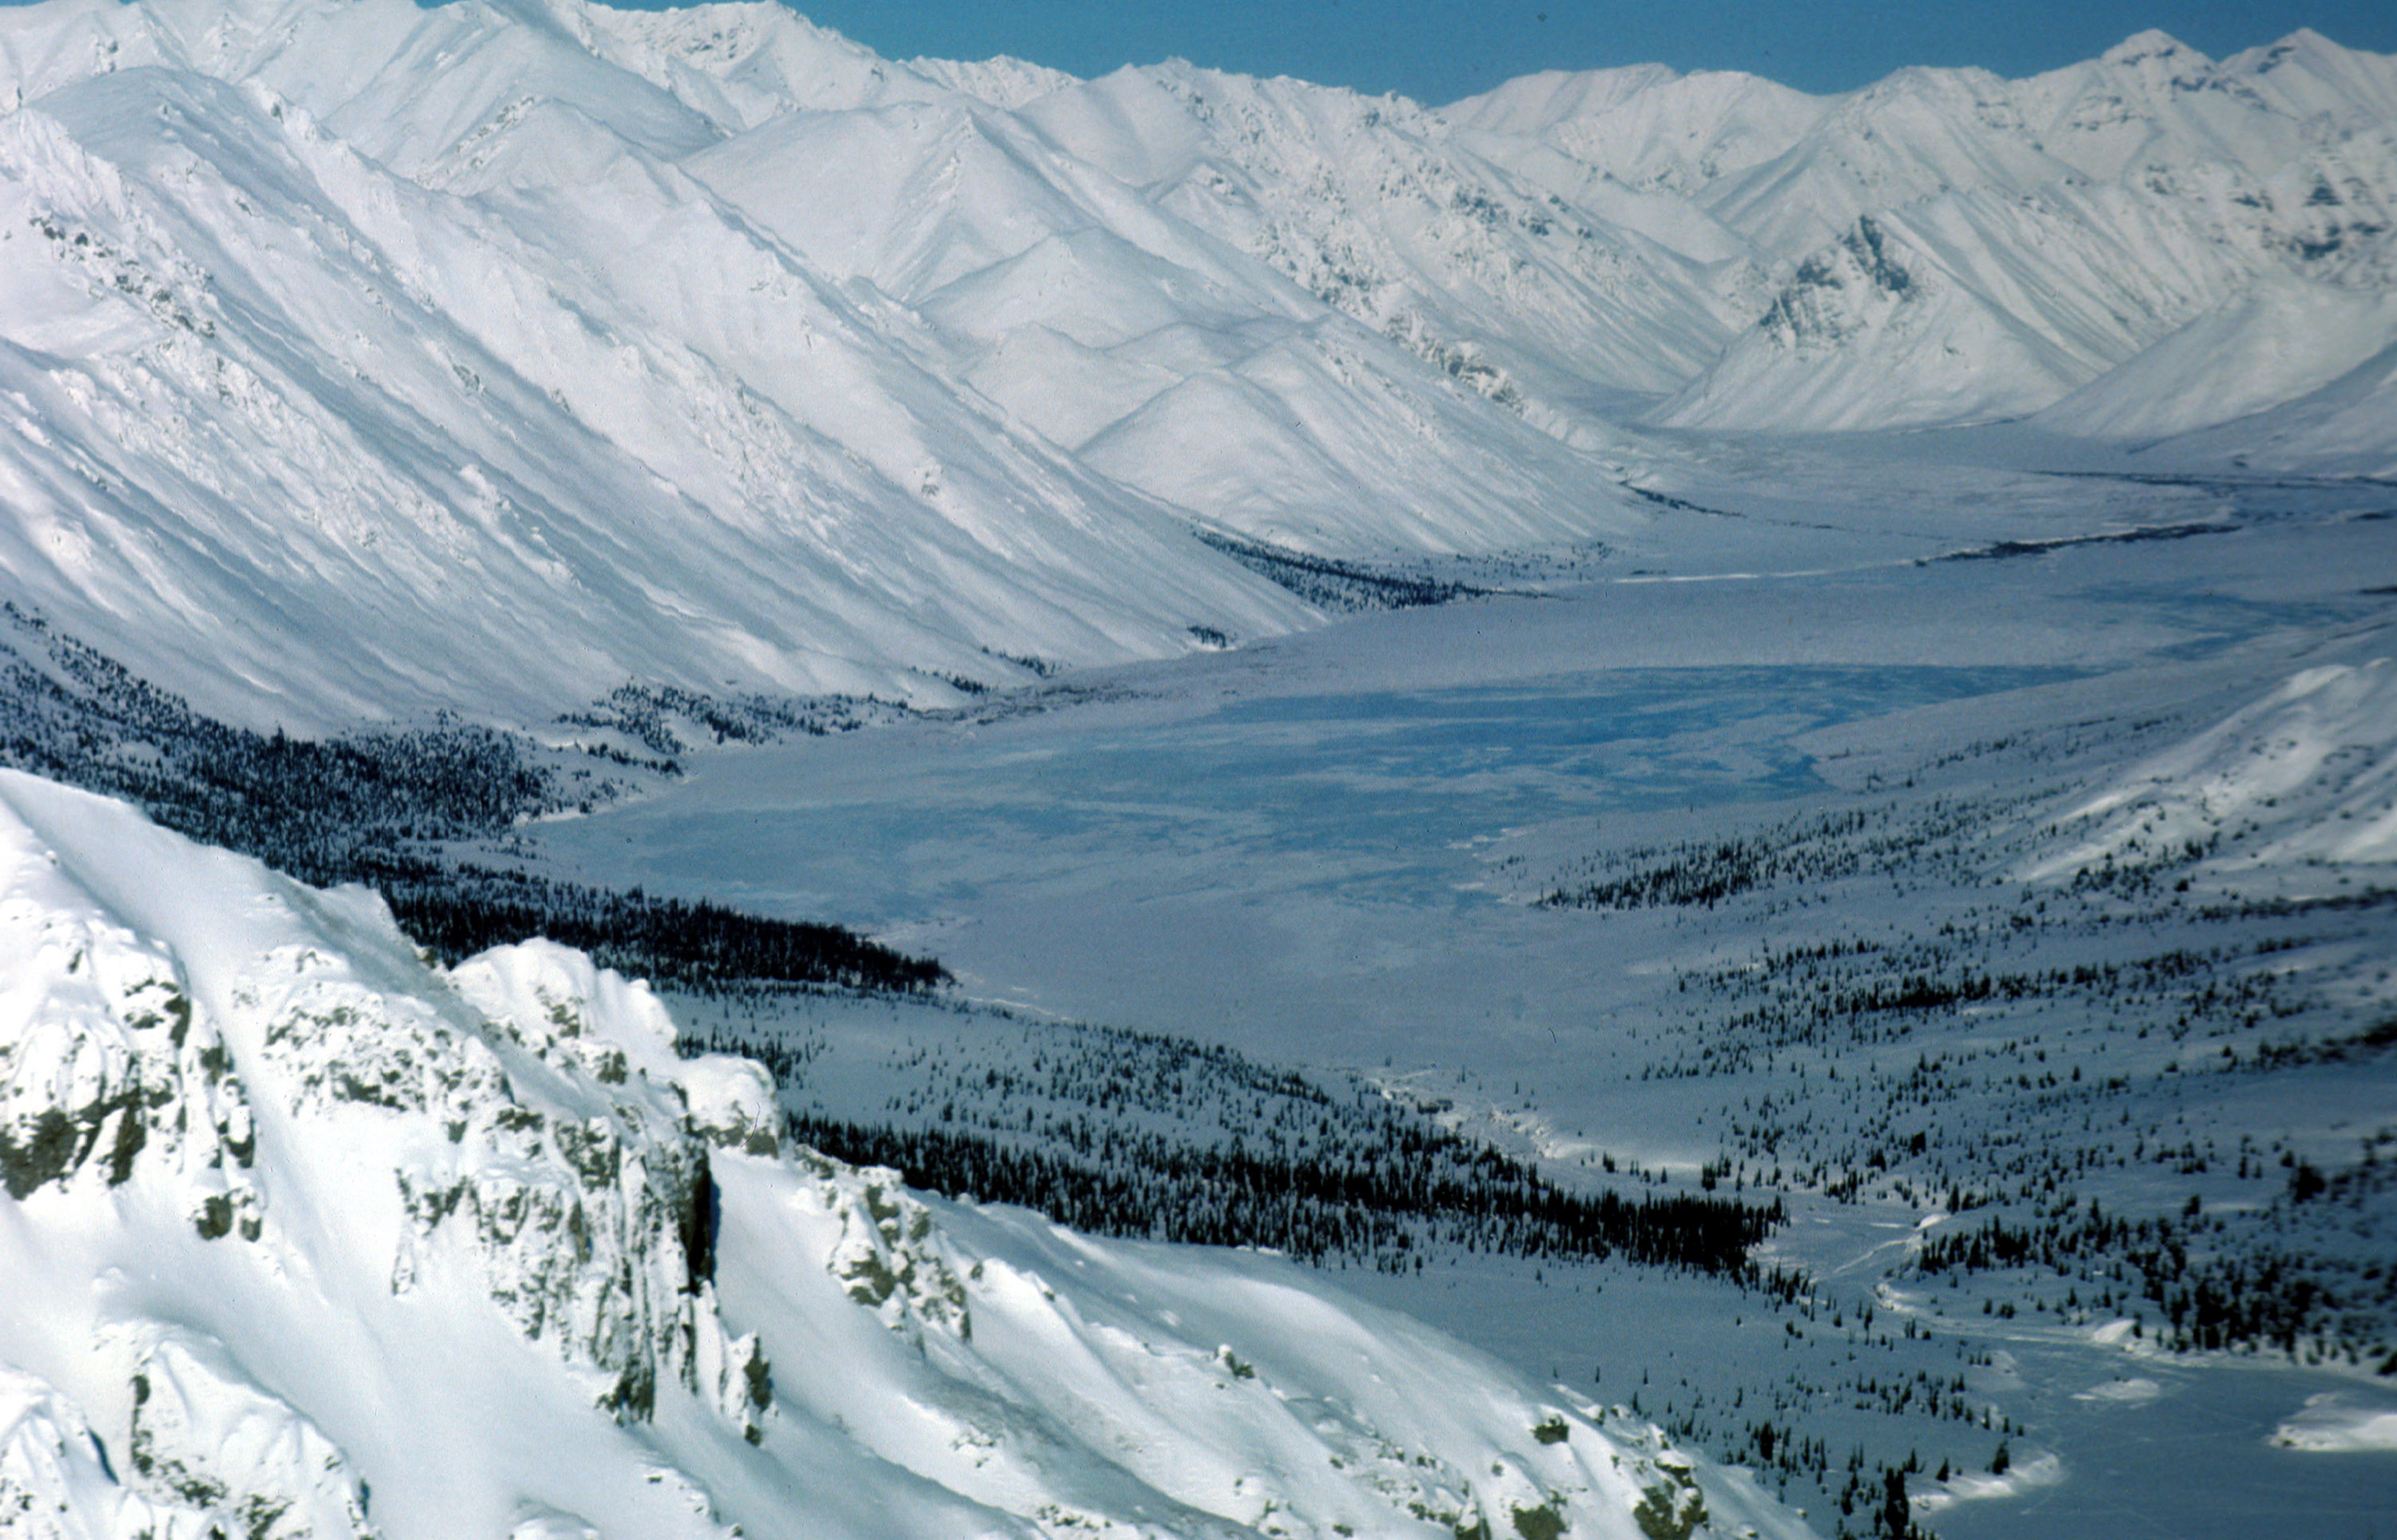 392886 13: (FILE PHOTO) This undated photo shows the Arctic National Wildlife Refuge in Alaska. The Bush administration''s controversial plan to open the refuge to oil drilling was approved by the House of Representatives on August 2, 2001, but it faces a tough battle in the Senate. (Photo by U.S. Fish and Wildlife Service/Getty Images)